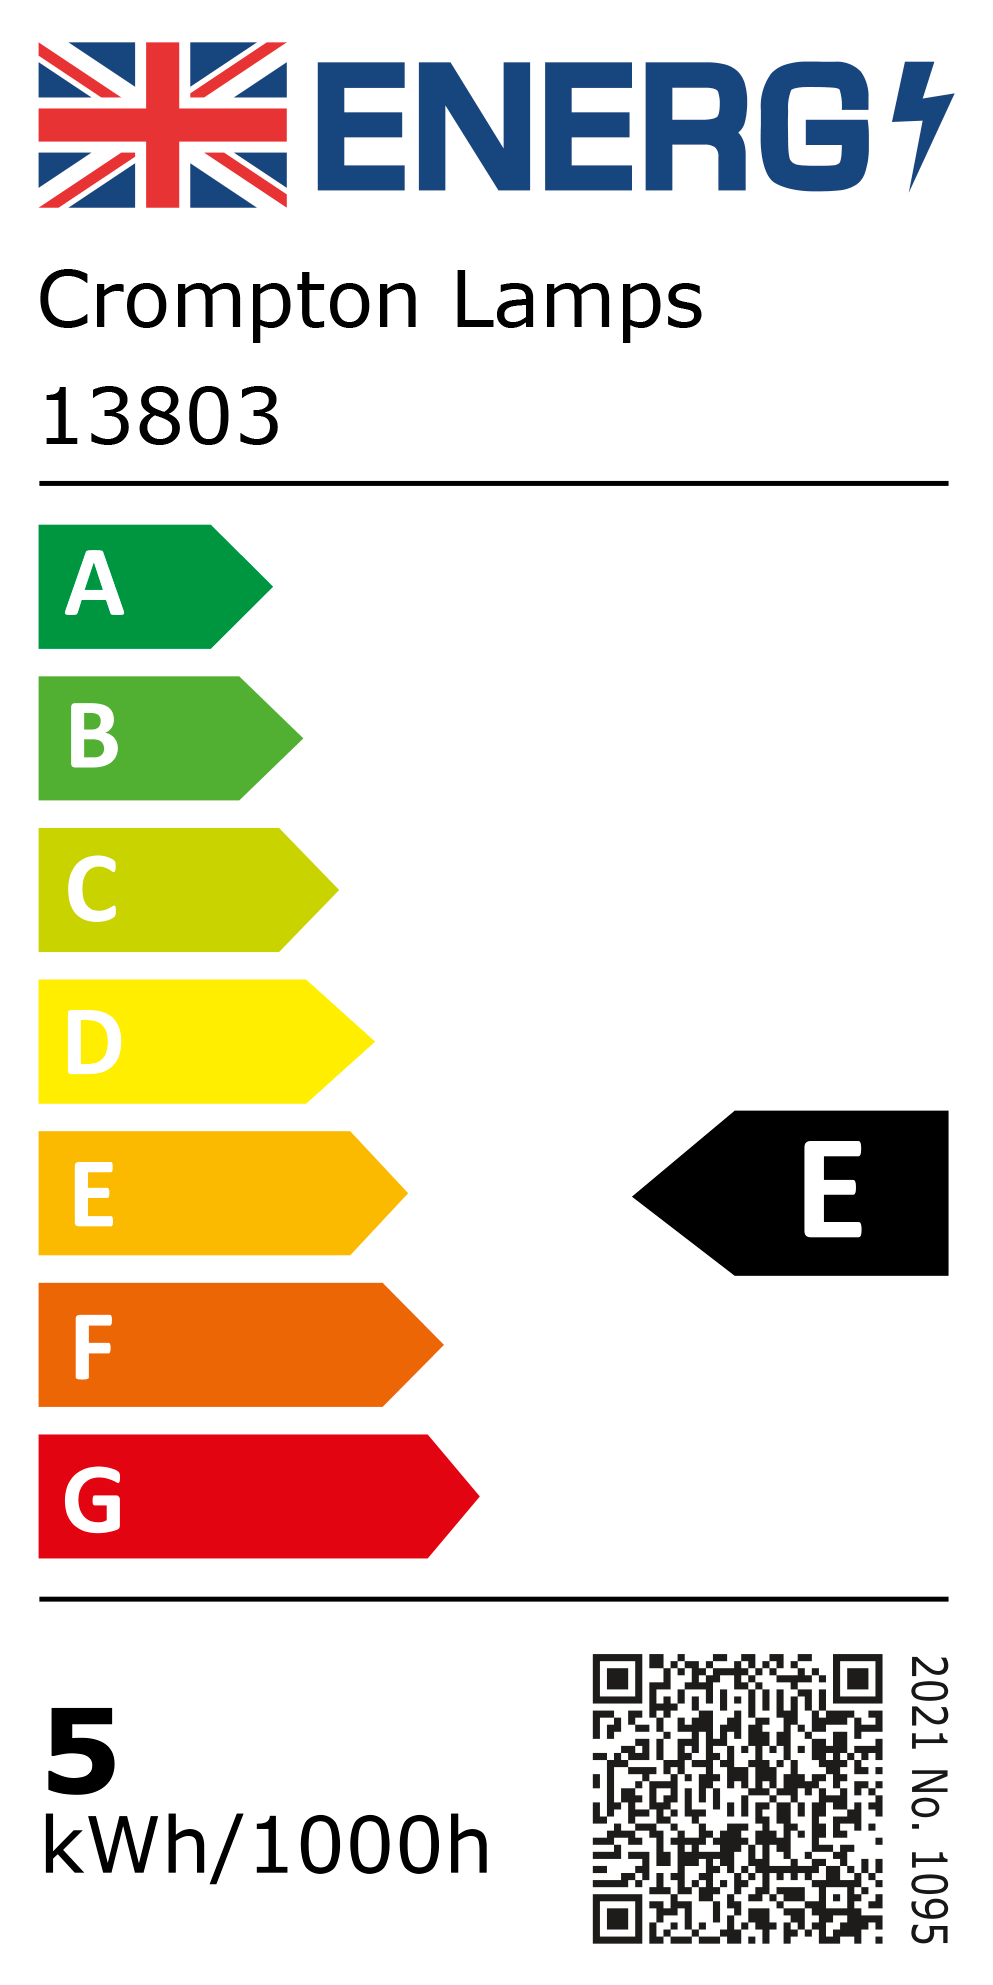 New 2021 Energy Rating Label: Stock Code 13803